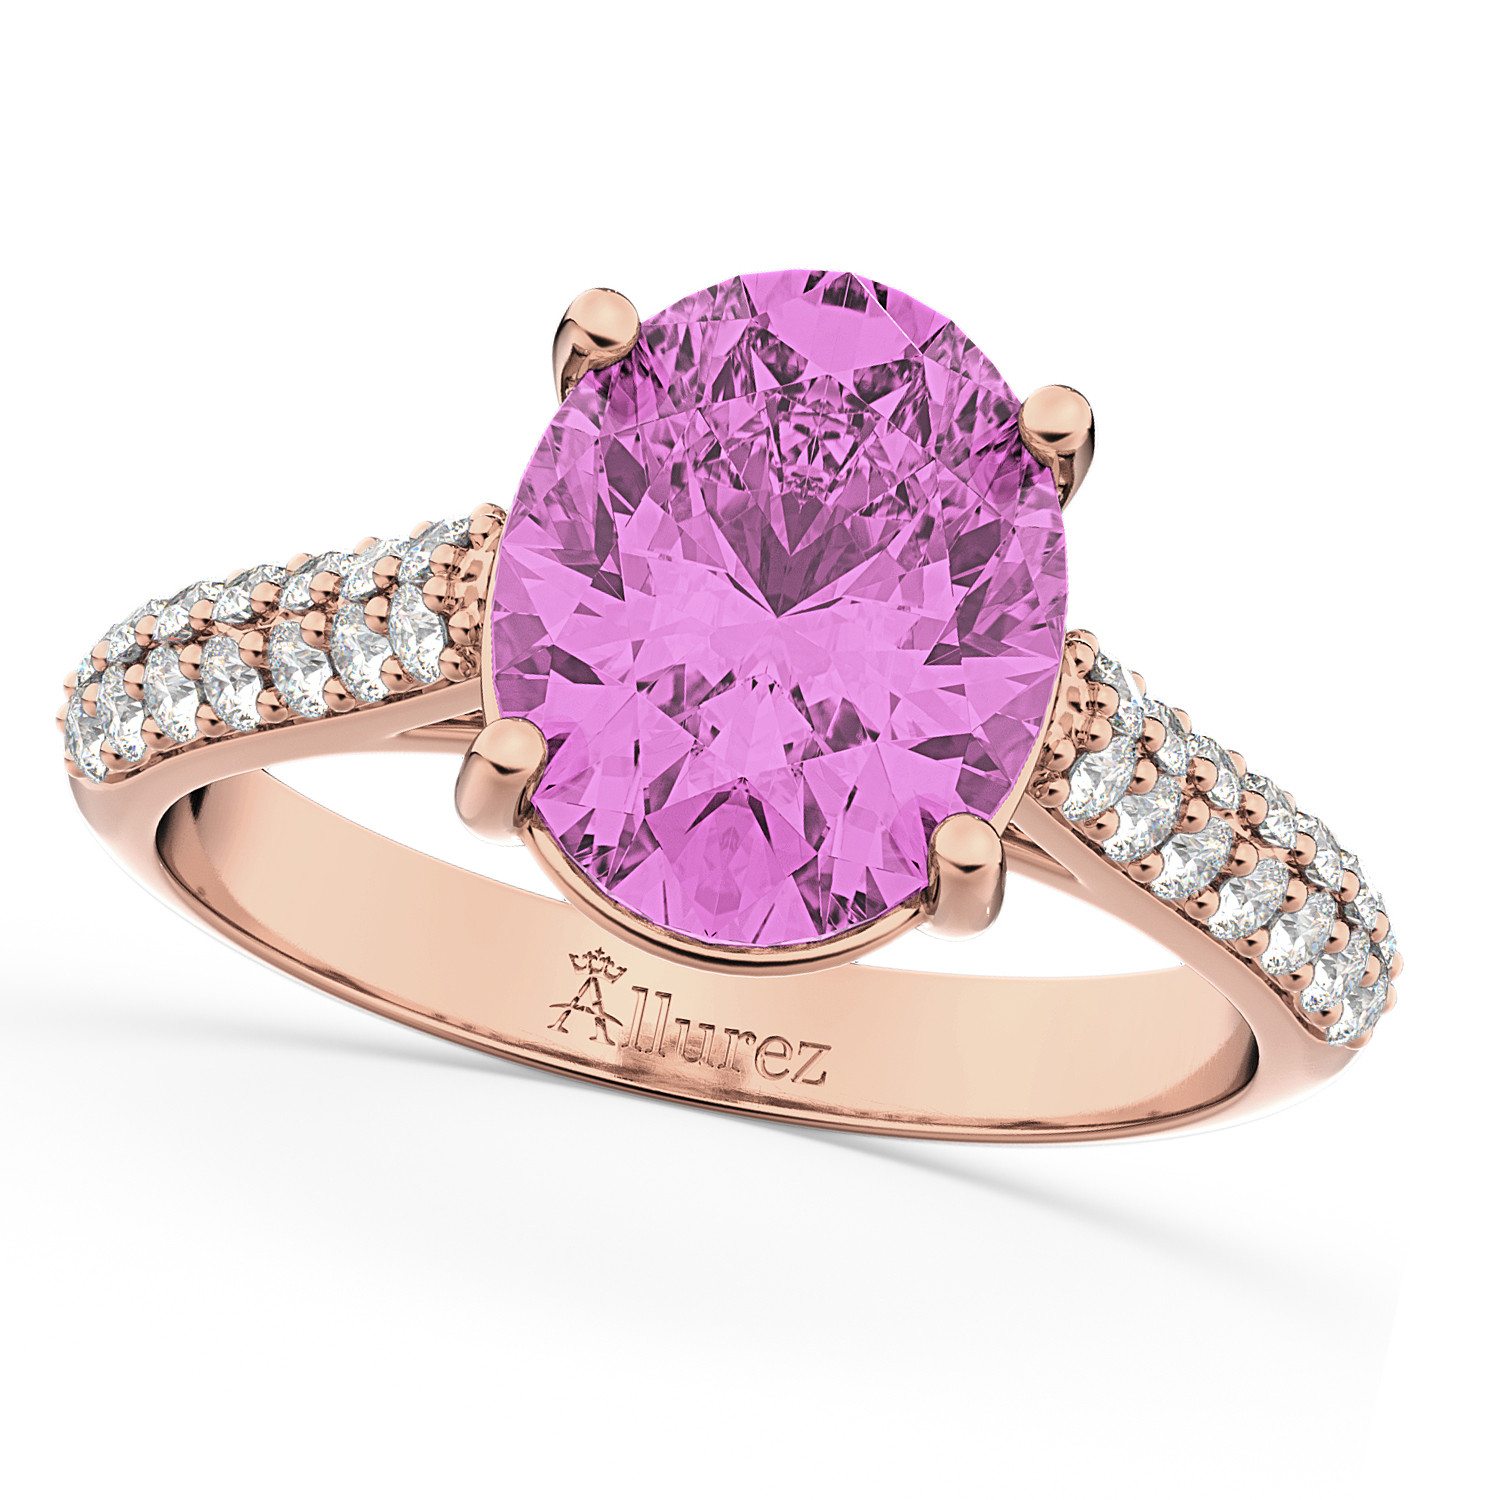 Diamond And Pink Sapphire Engagement Ring
 Oval Pink Sapphire & Diamond Engagement Ring 14k Rose Gold